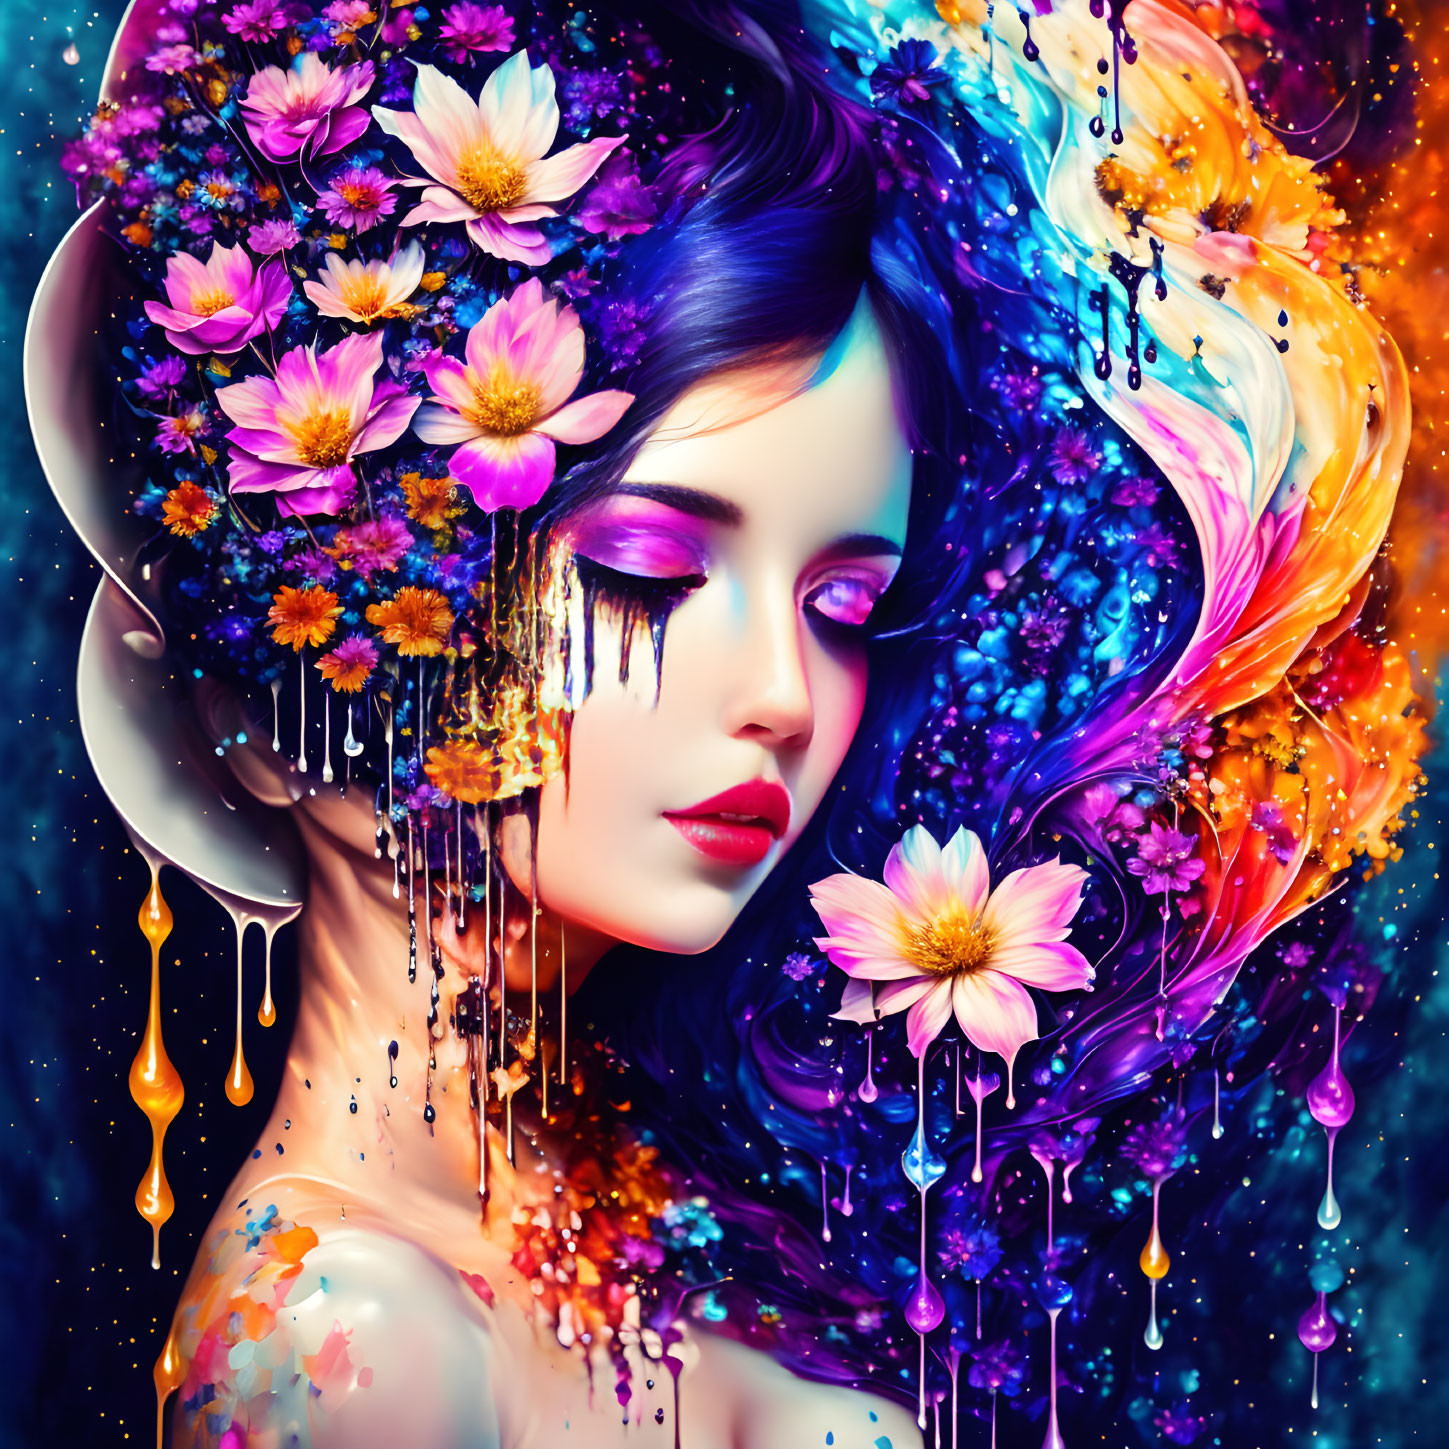 Vibrant woman illustration with floral hair and paint drips